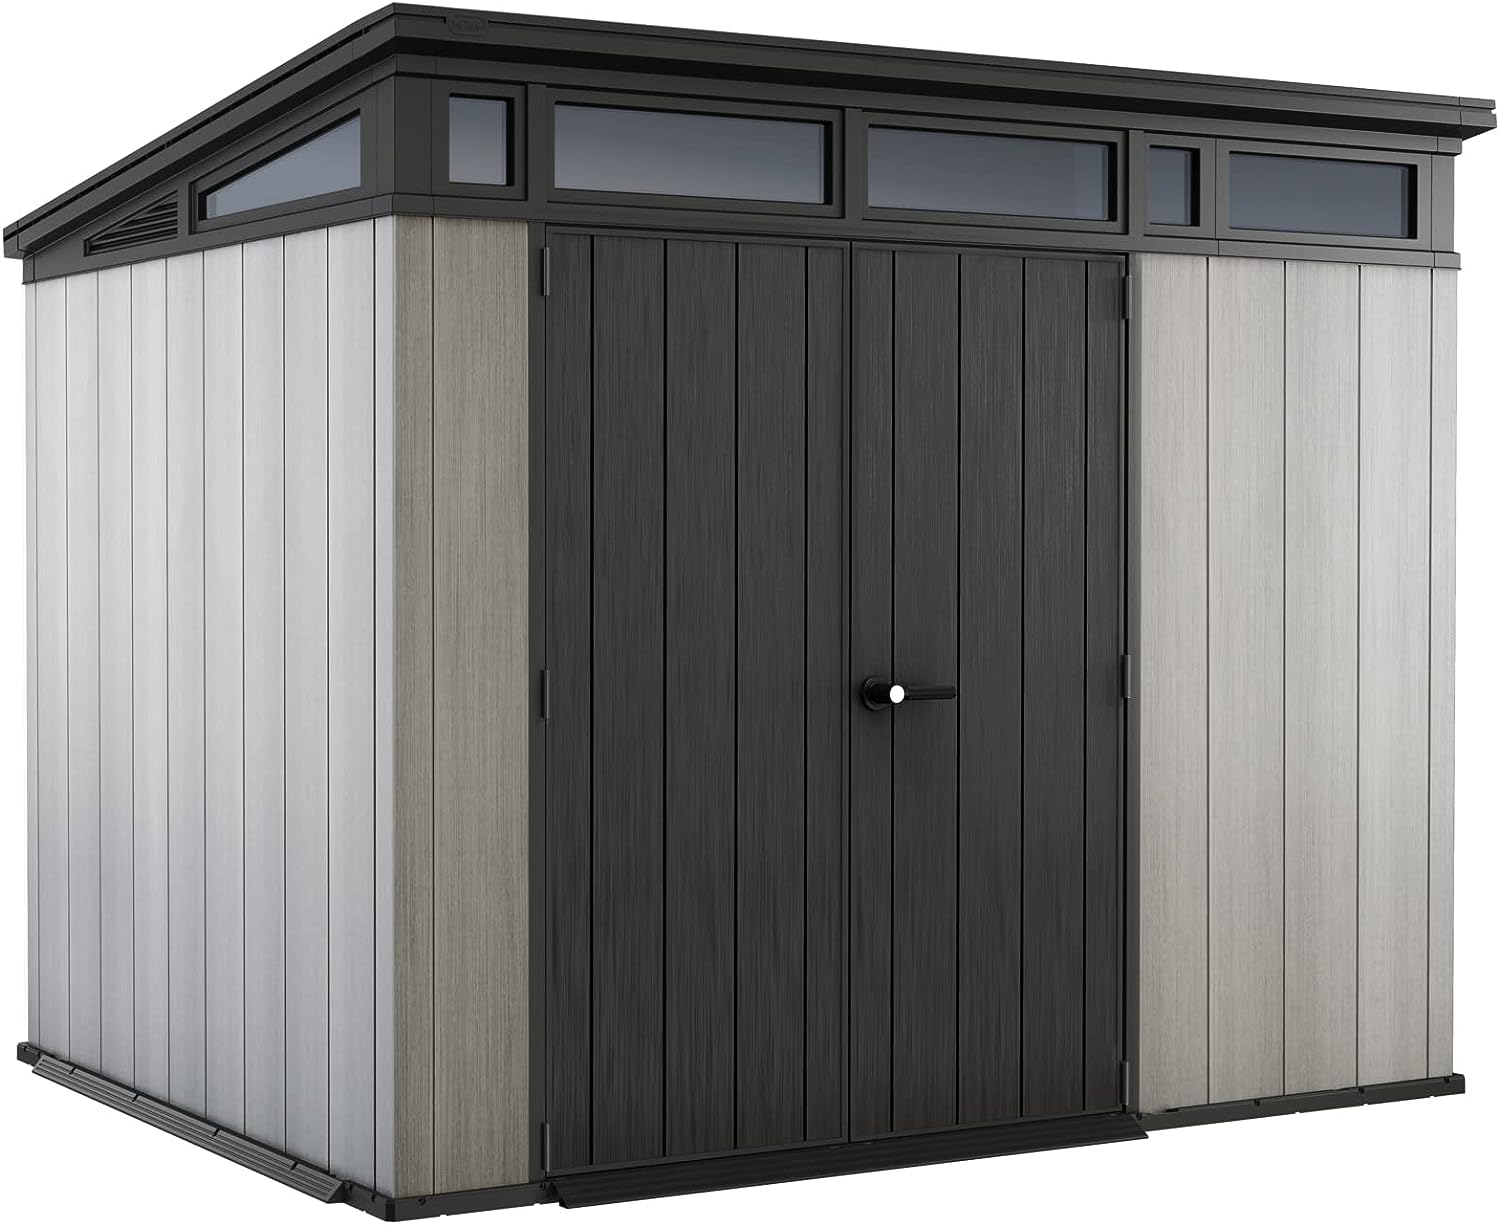 Keter Artisan 9x7 Foot Large Outdoor Shed with Floor [...]